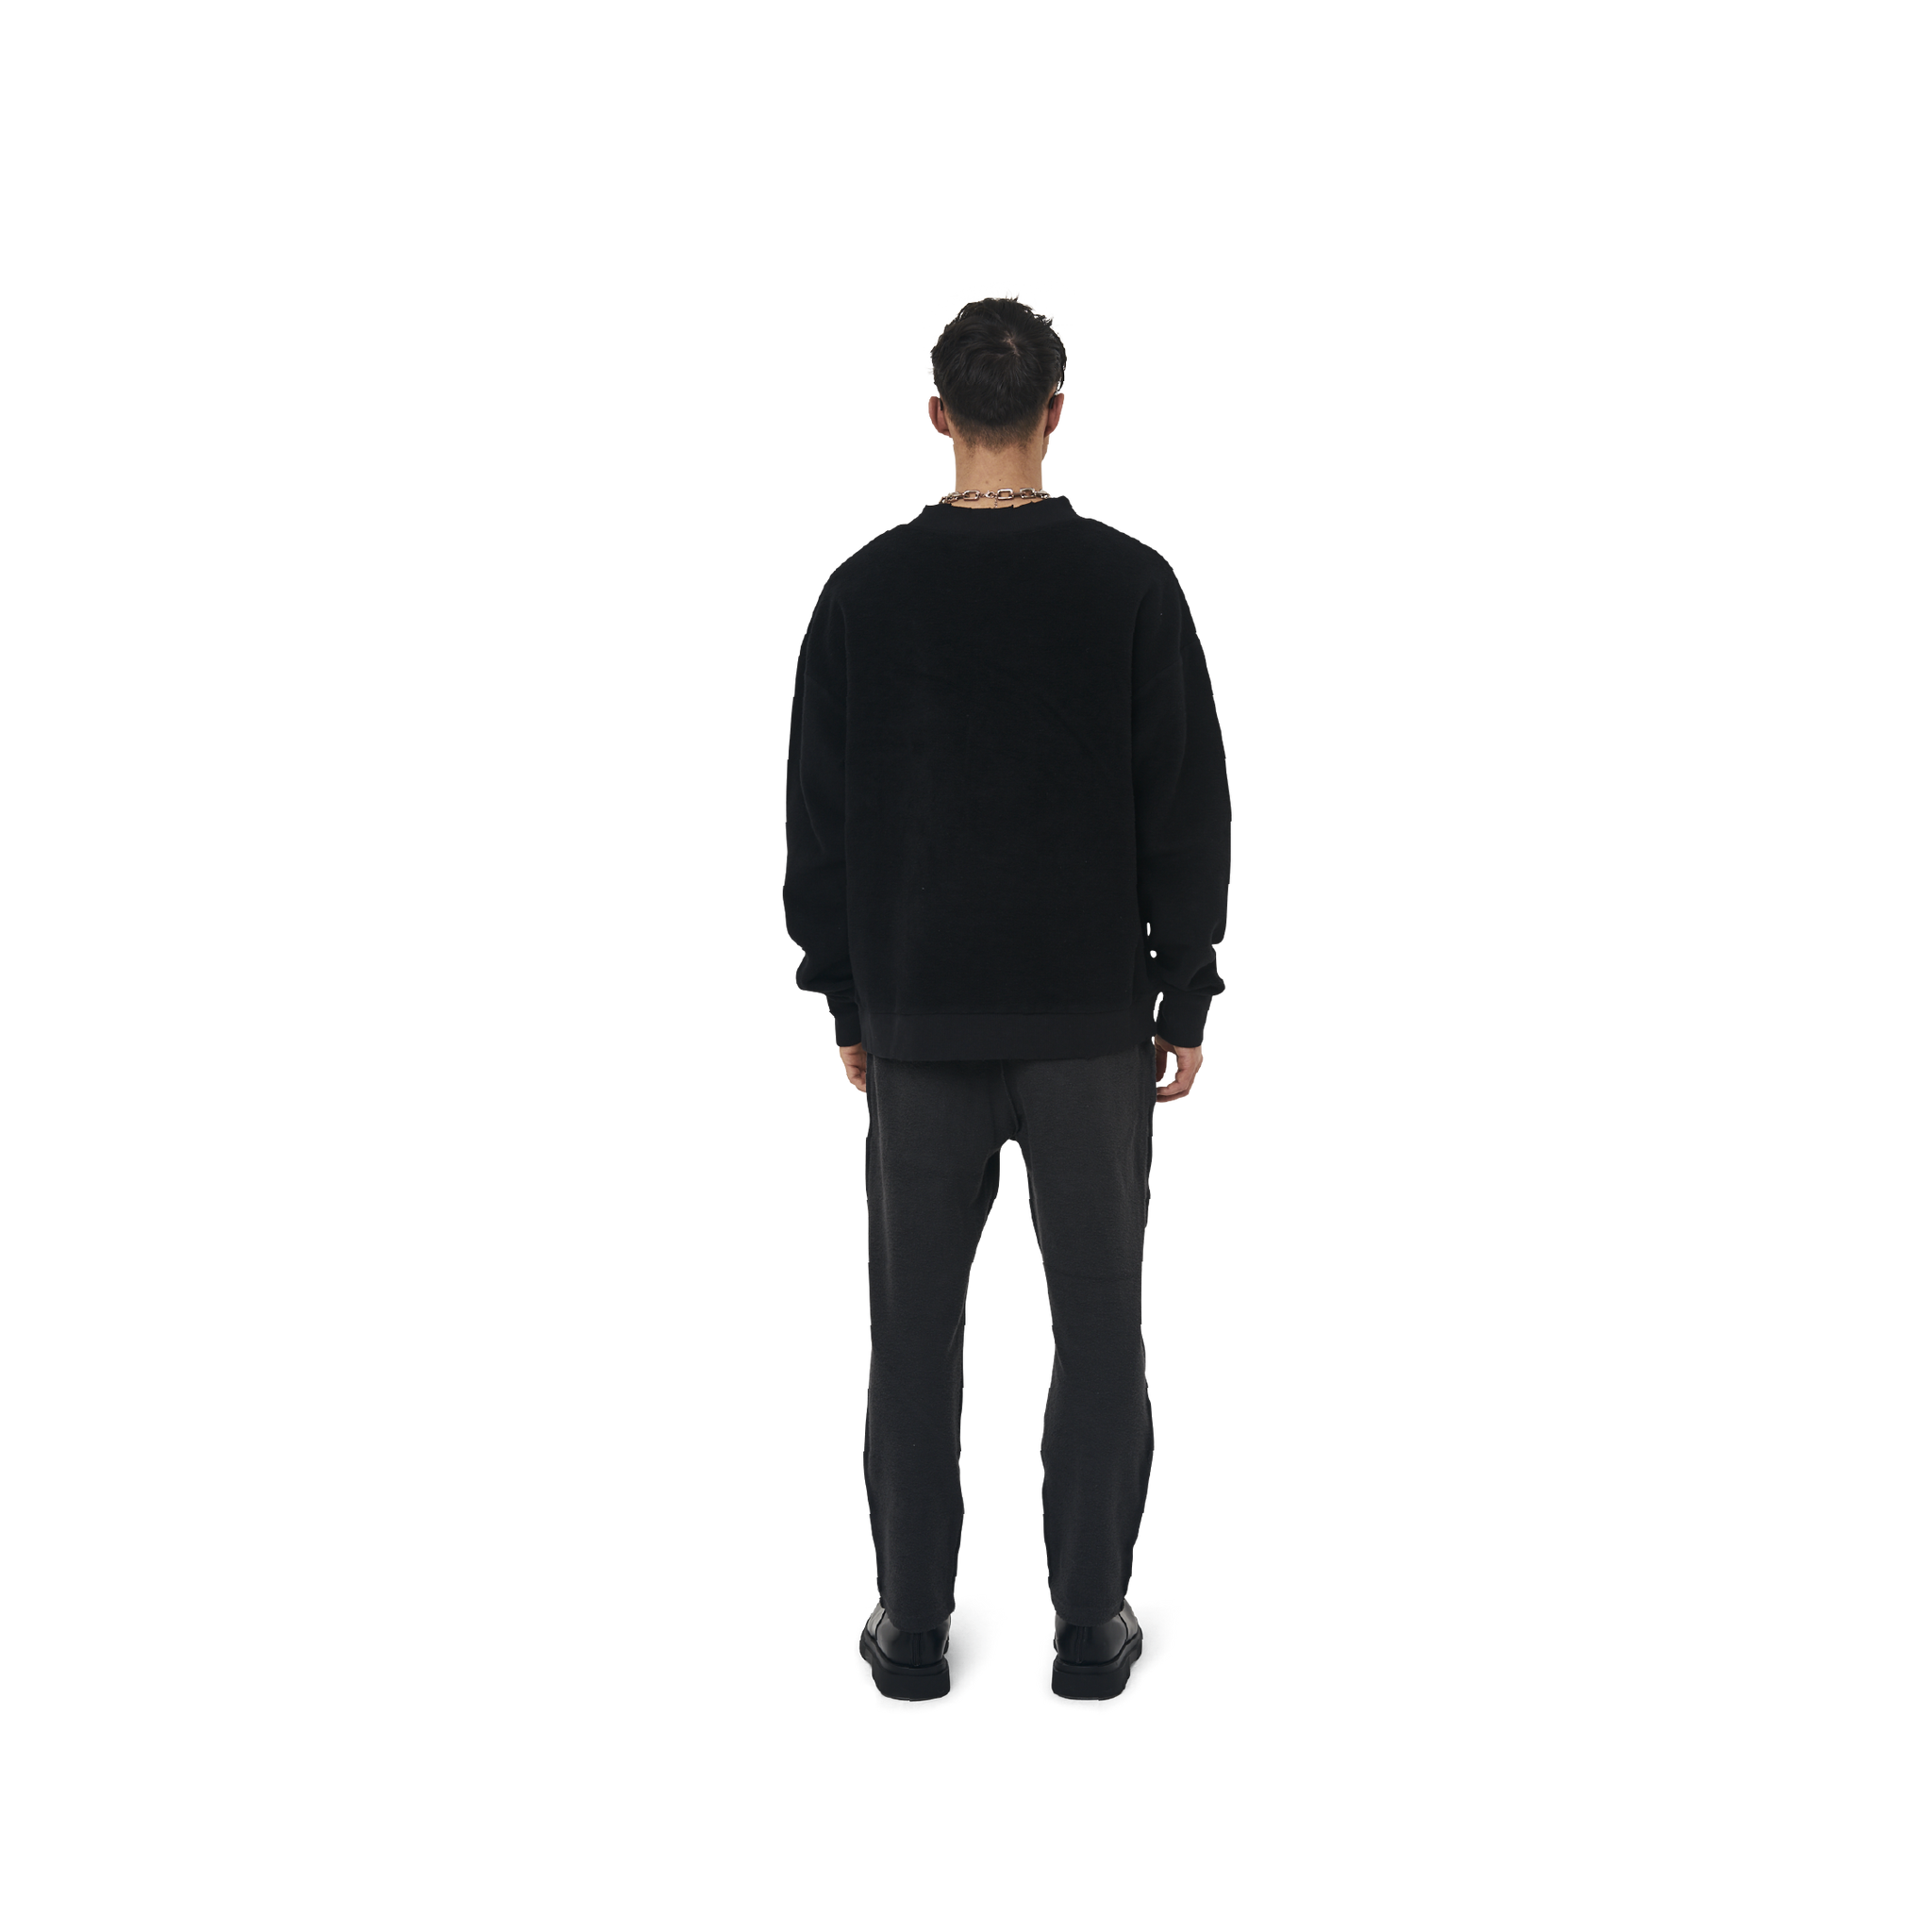 Long sleeves loose cut jumper in black color fabric featuring Eighteen Eighty-Six embroidered at front. Rib knit at cuffs and hem.